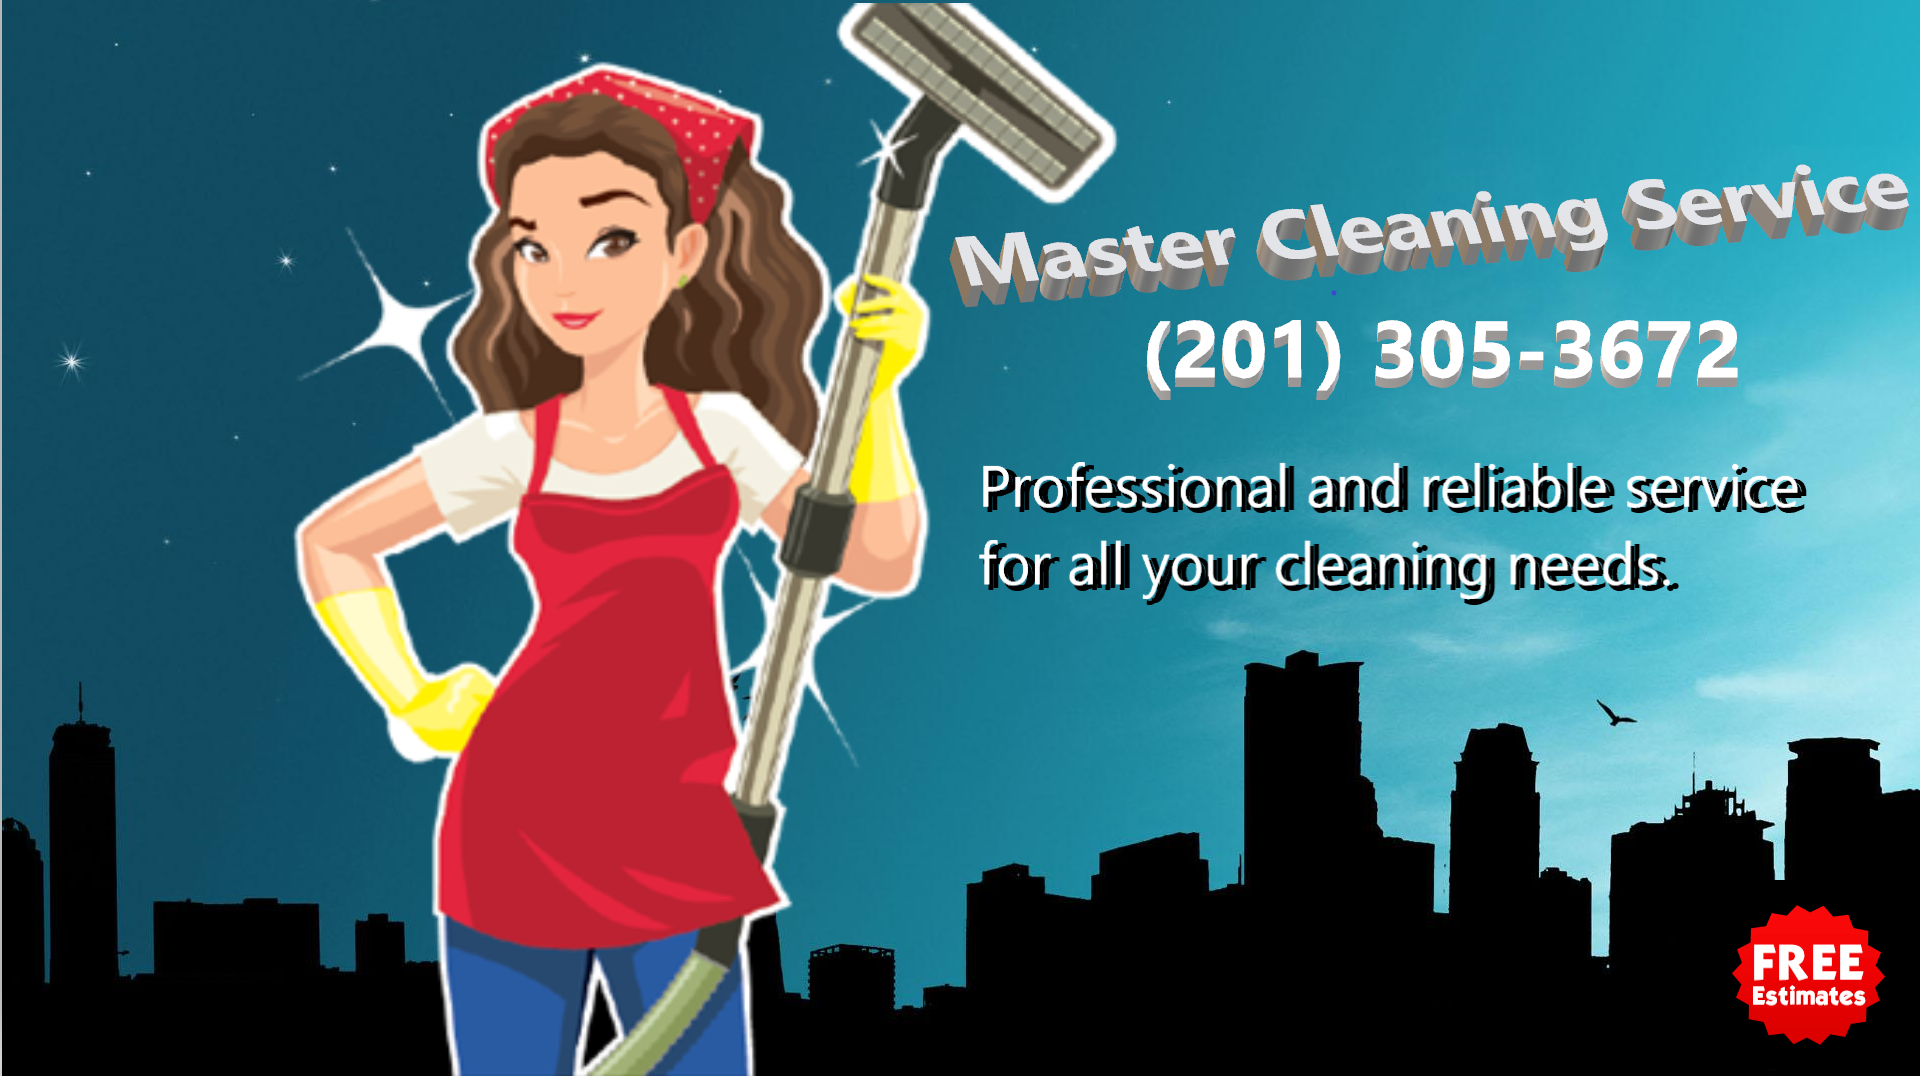 Master Cleaning Service